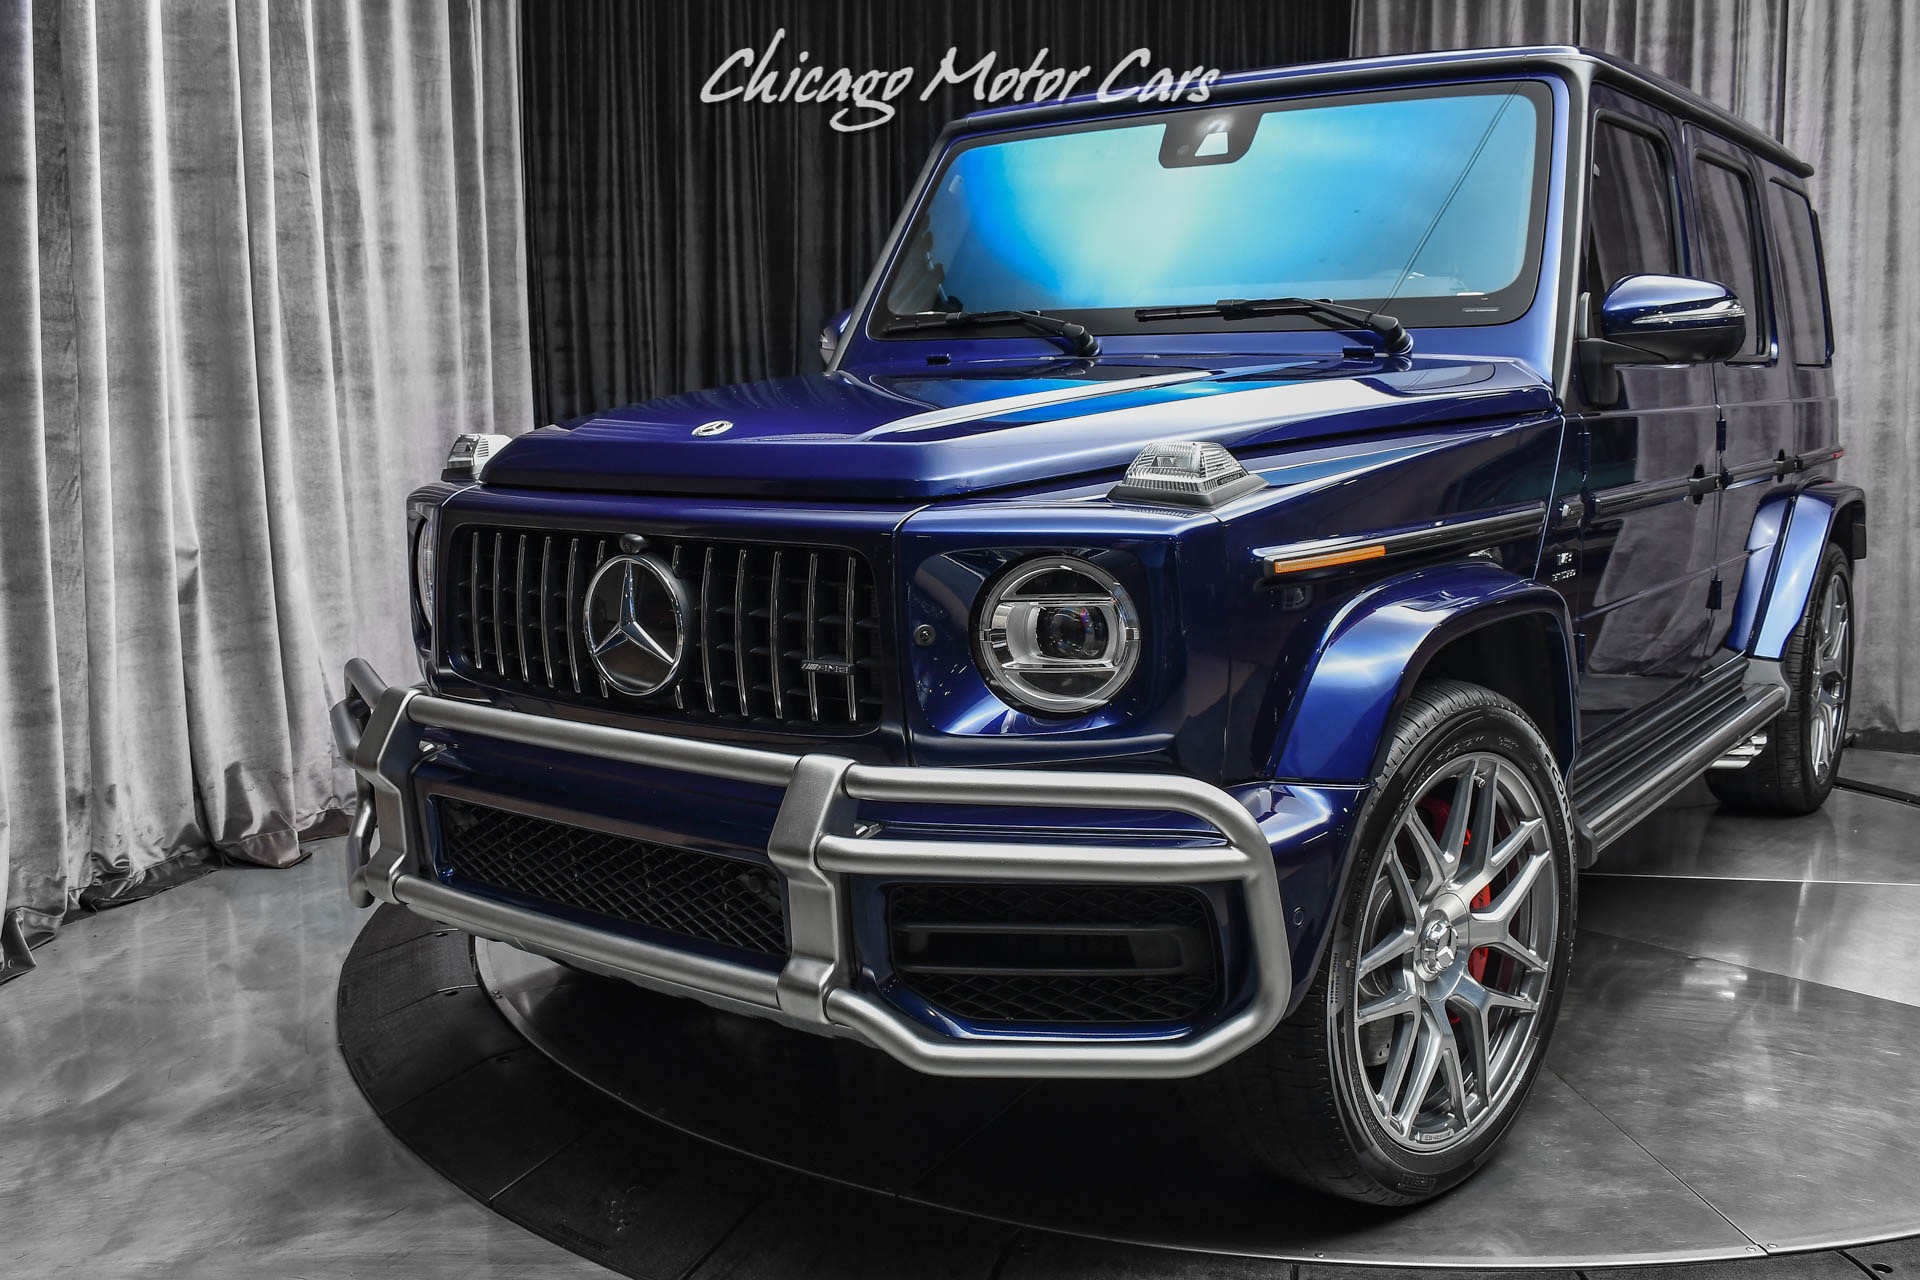 Used 2021 Mercedes-Benz G63 AMG SUV RARE Designo Mystic Blue! ONLY